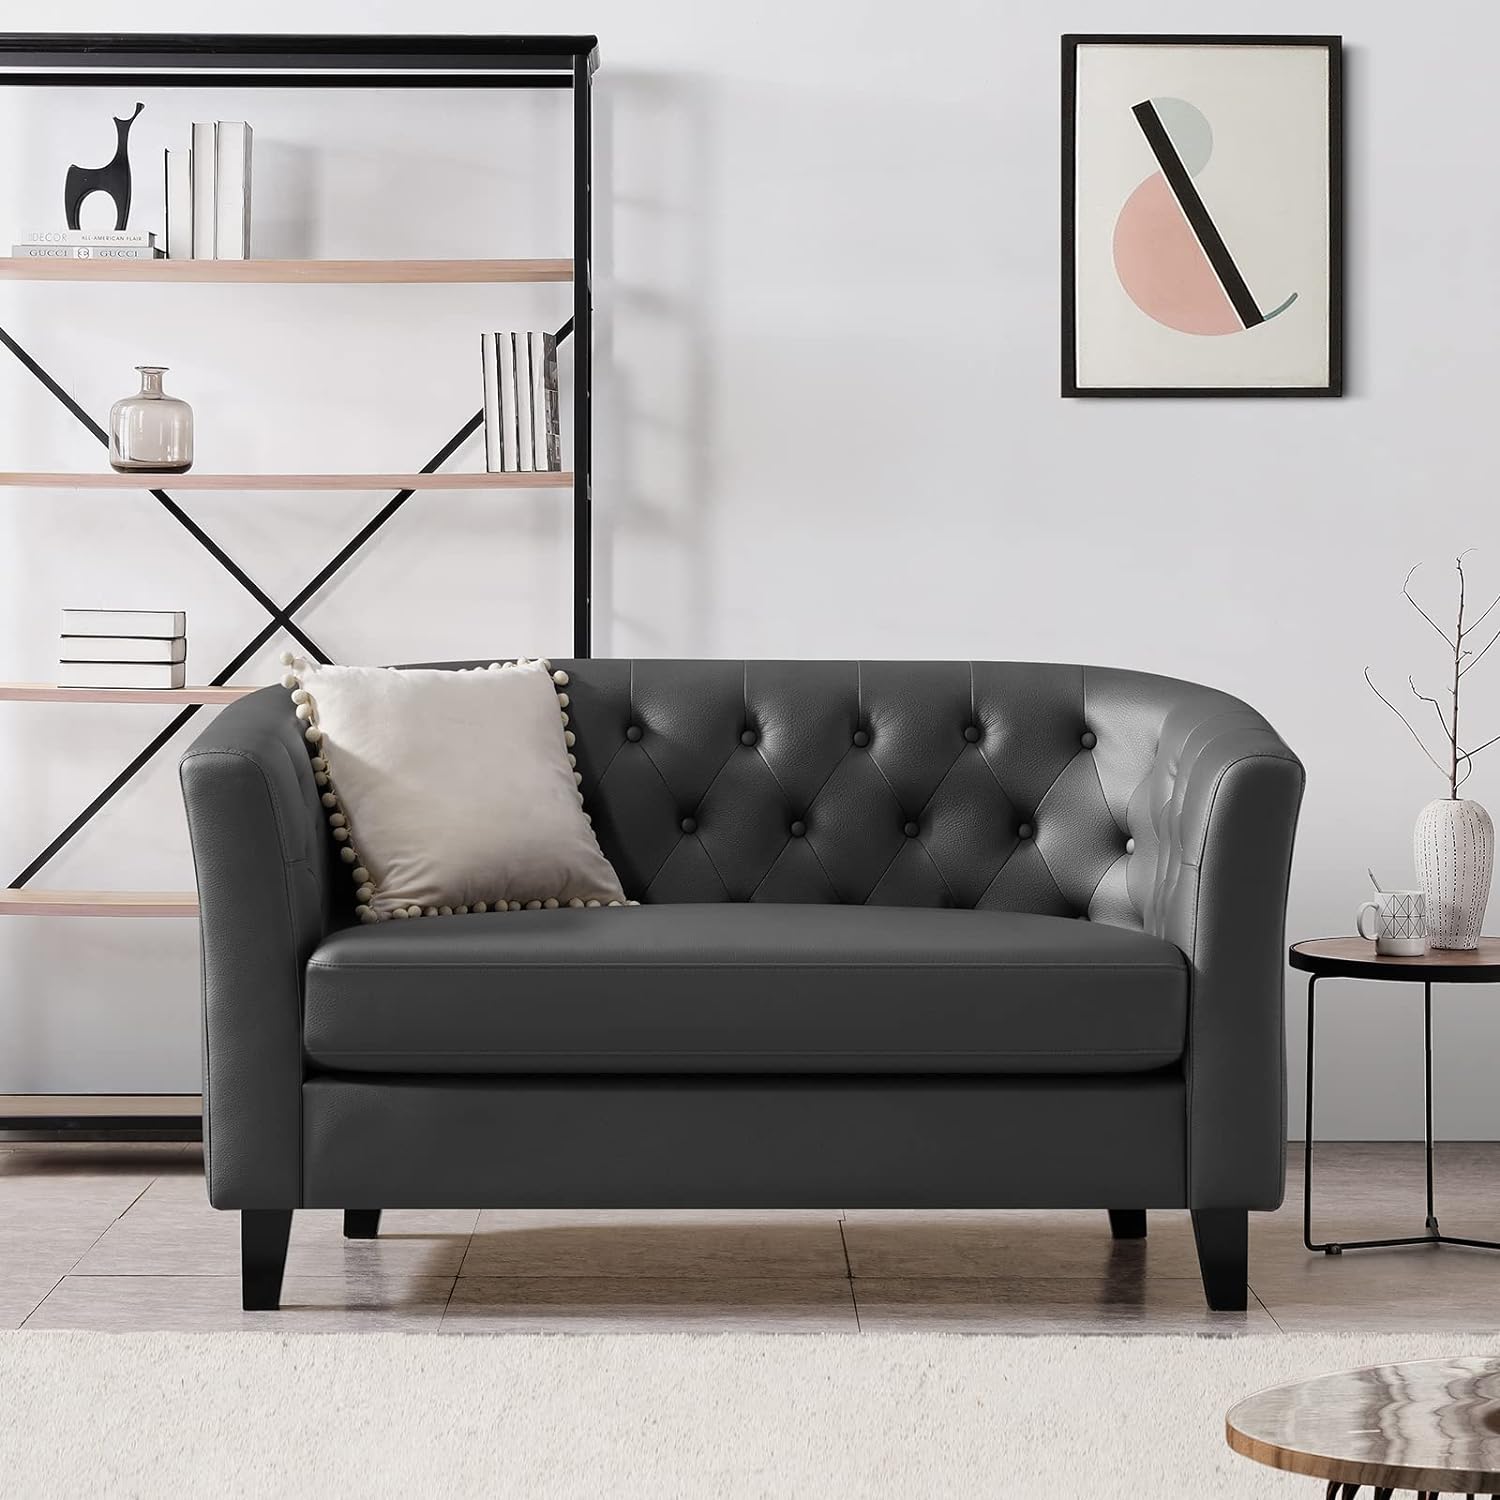 Husbedom 50 Inches Leather Loveseat